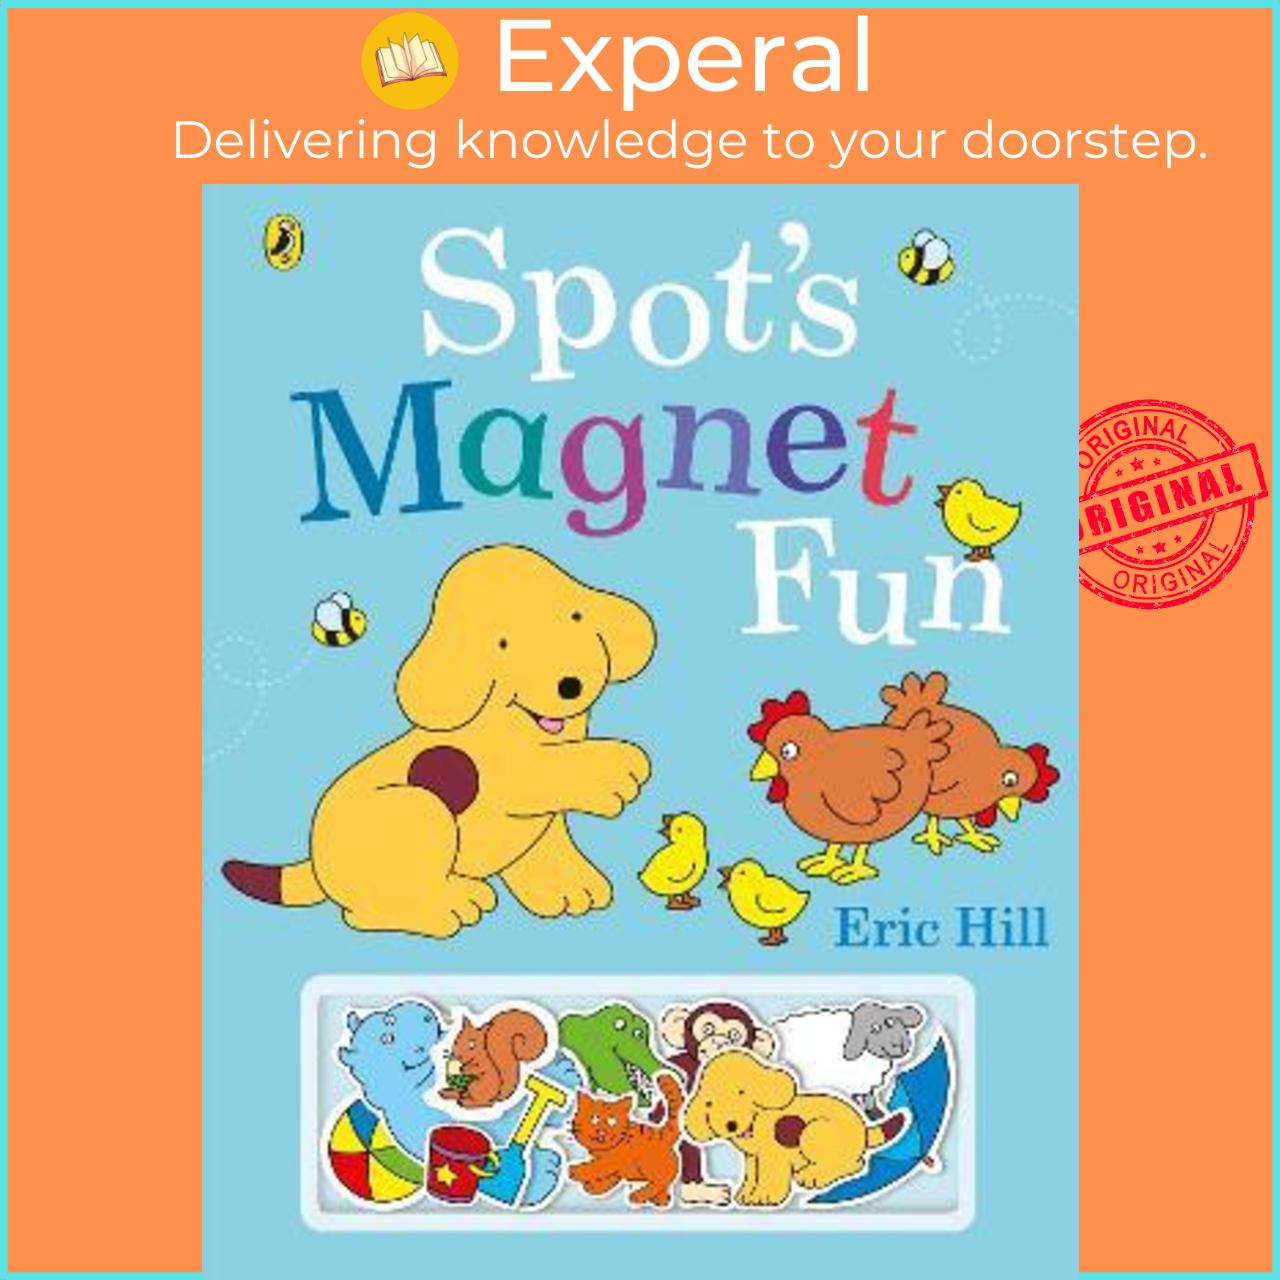 Sách - Spot's Magnet Fun by Eric Hill (UK edition, hardcover)